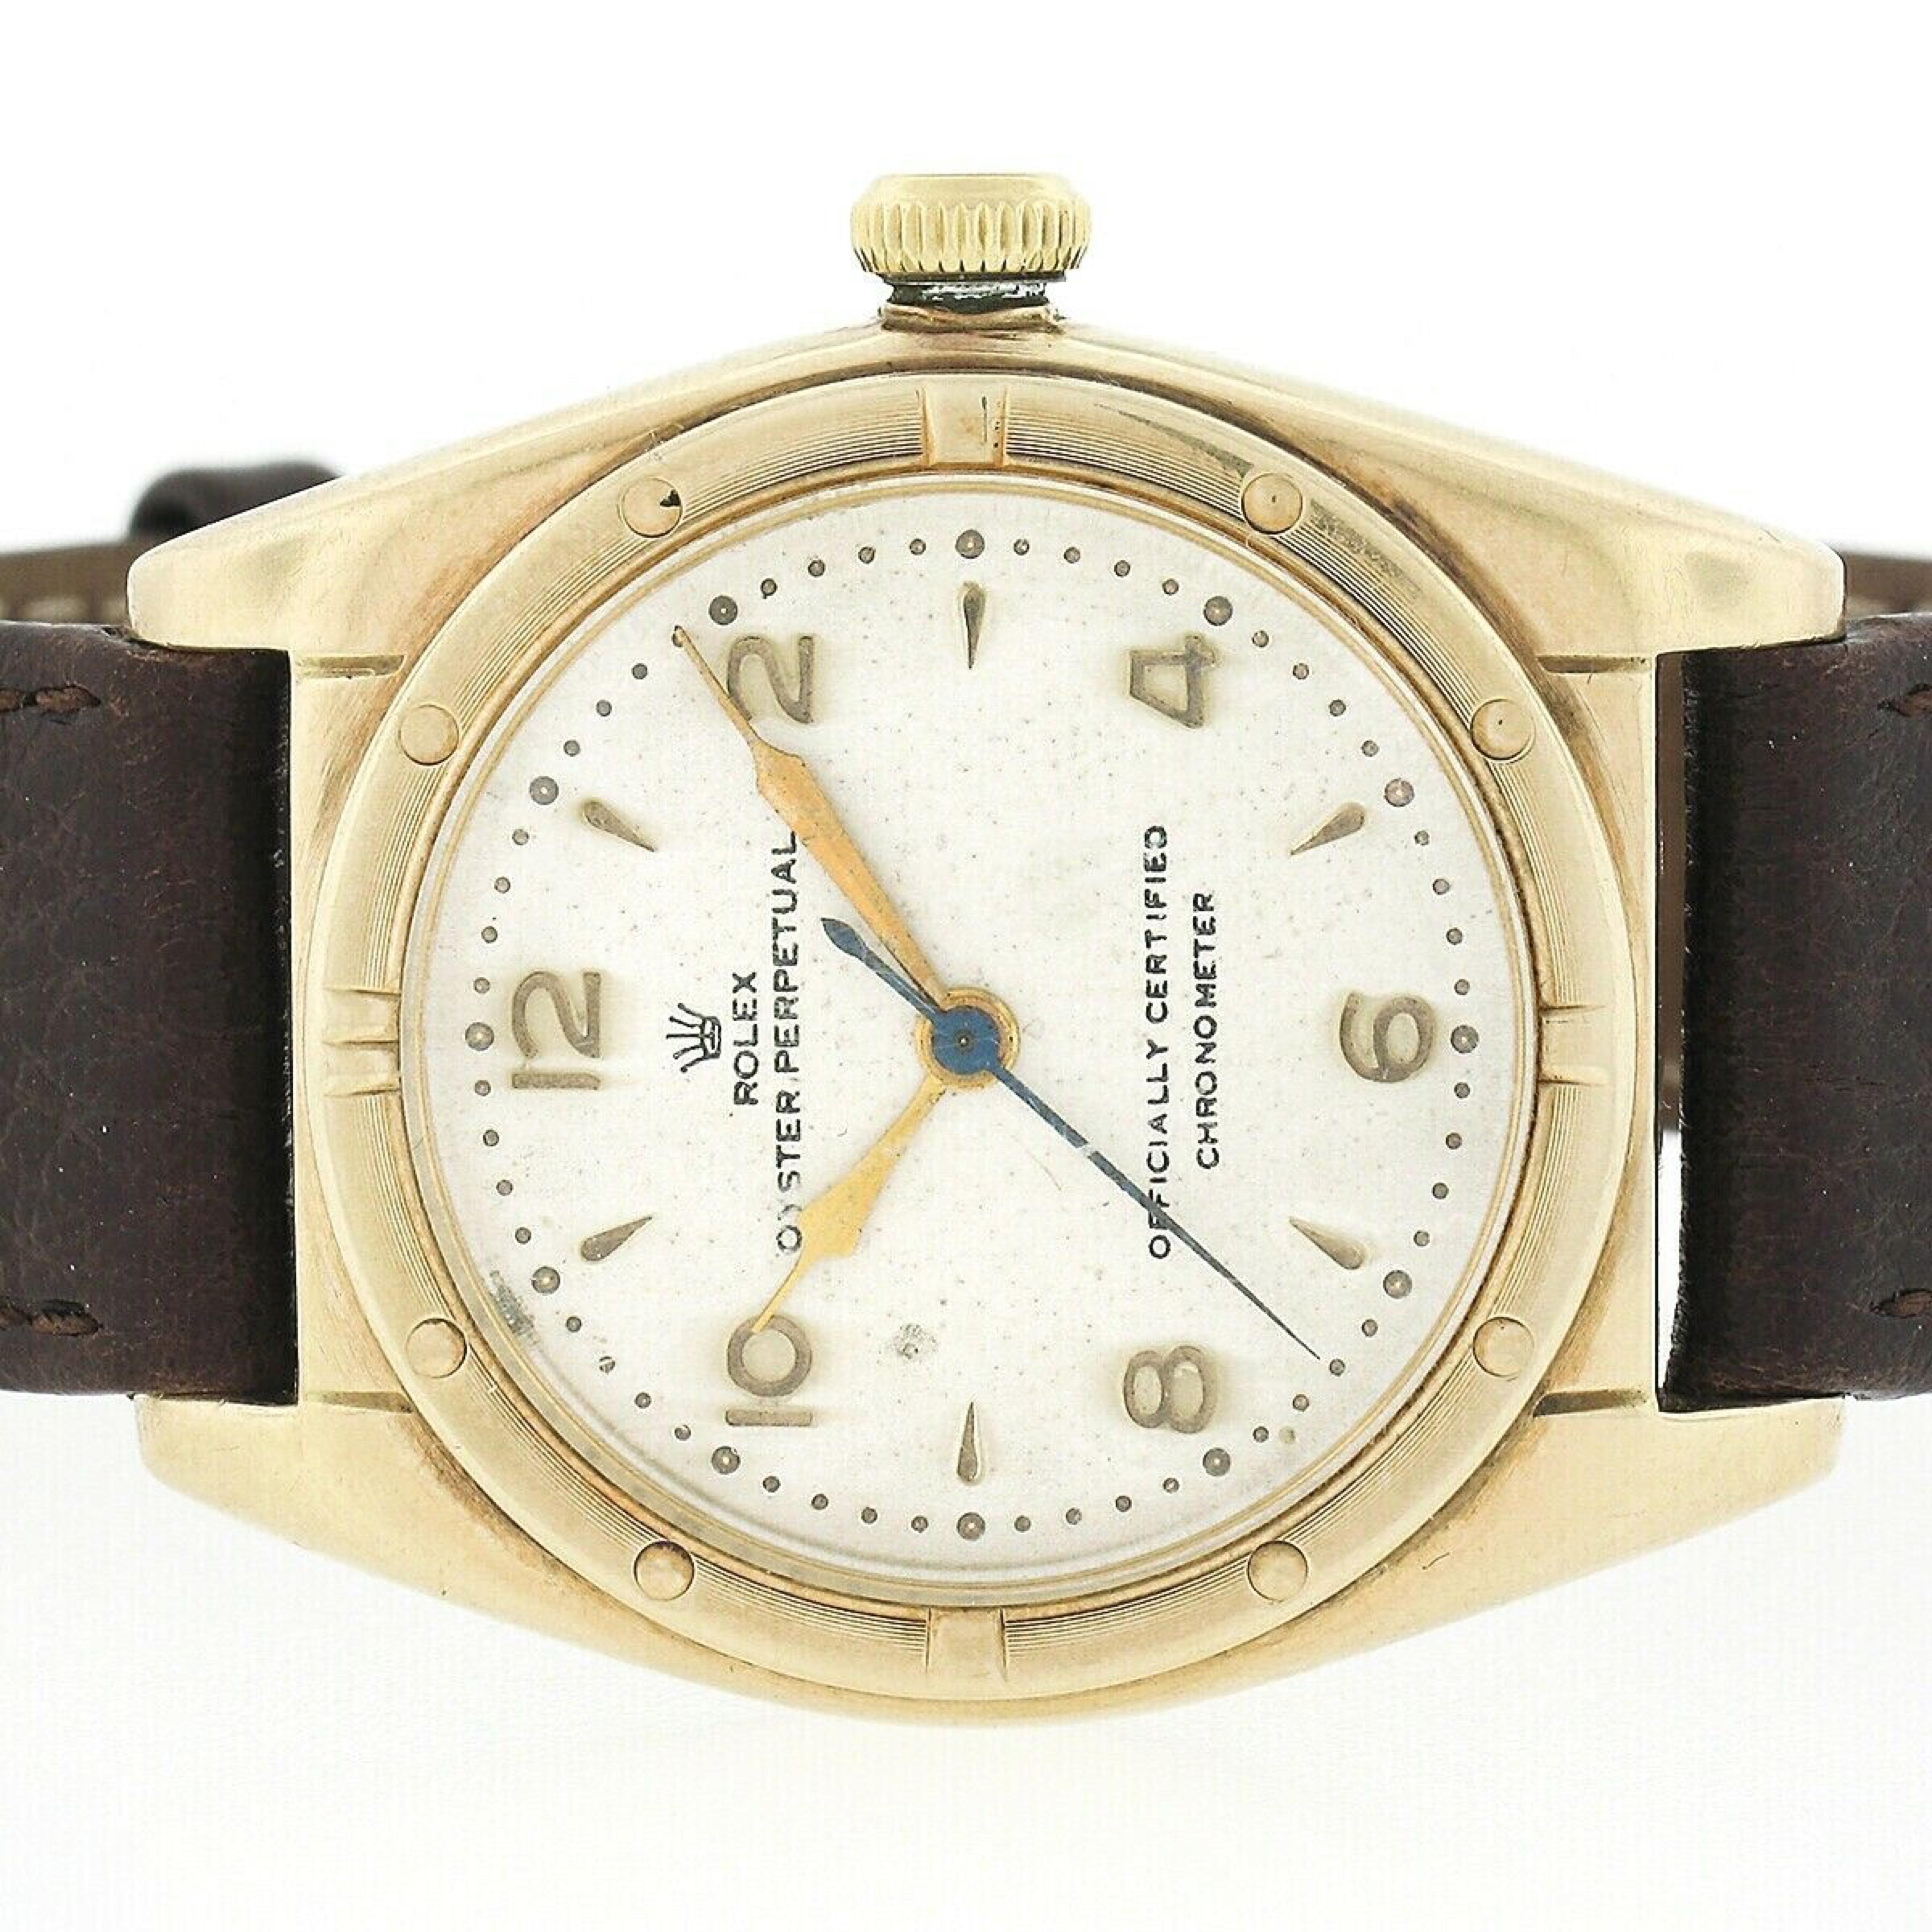 This gorgeous, vintage, Rolex Oyster Perpetual wrist watch is mounted in a 32mm case crafted in solid 14k yellow gold back in 1948. The watch features a self winding automatic Rolex movement that winds, sets, and runs smoothly. This watch has its